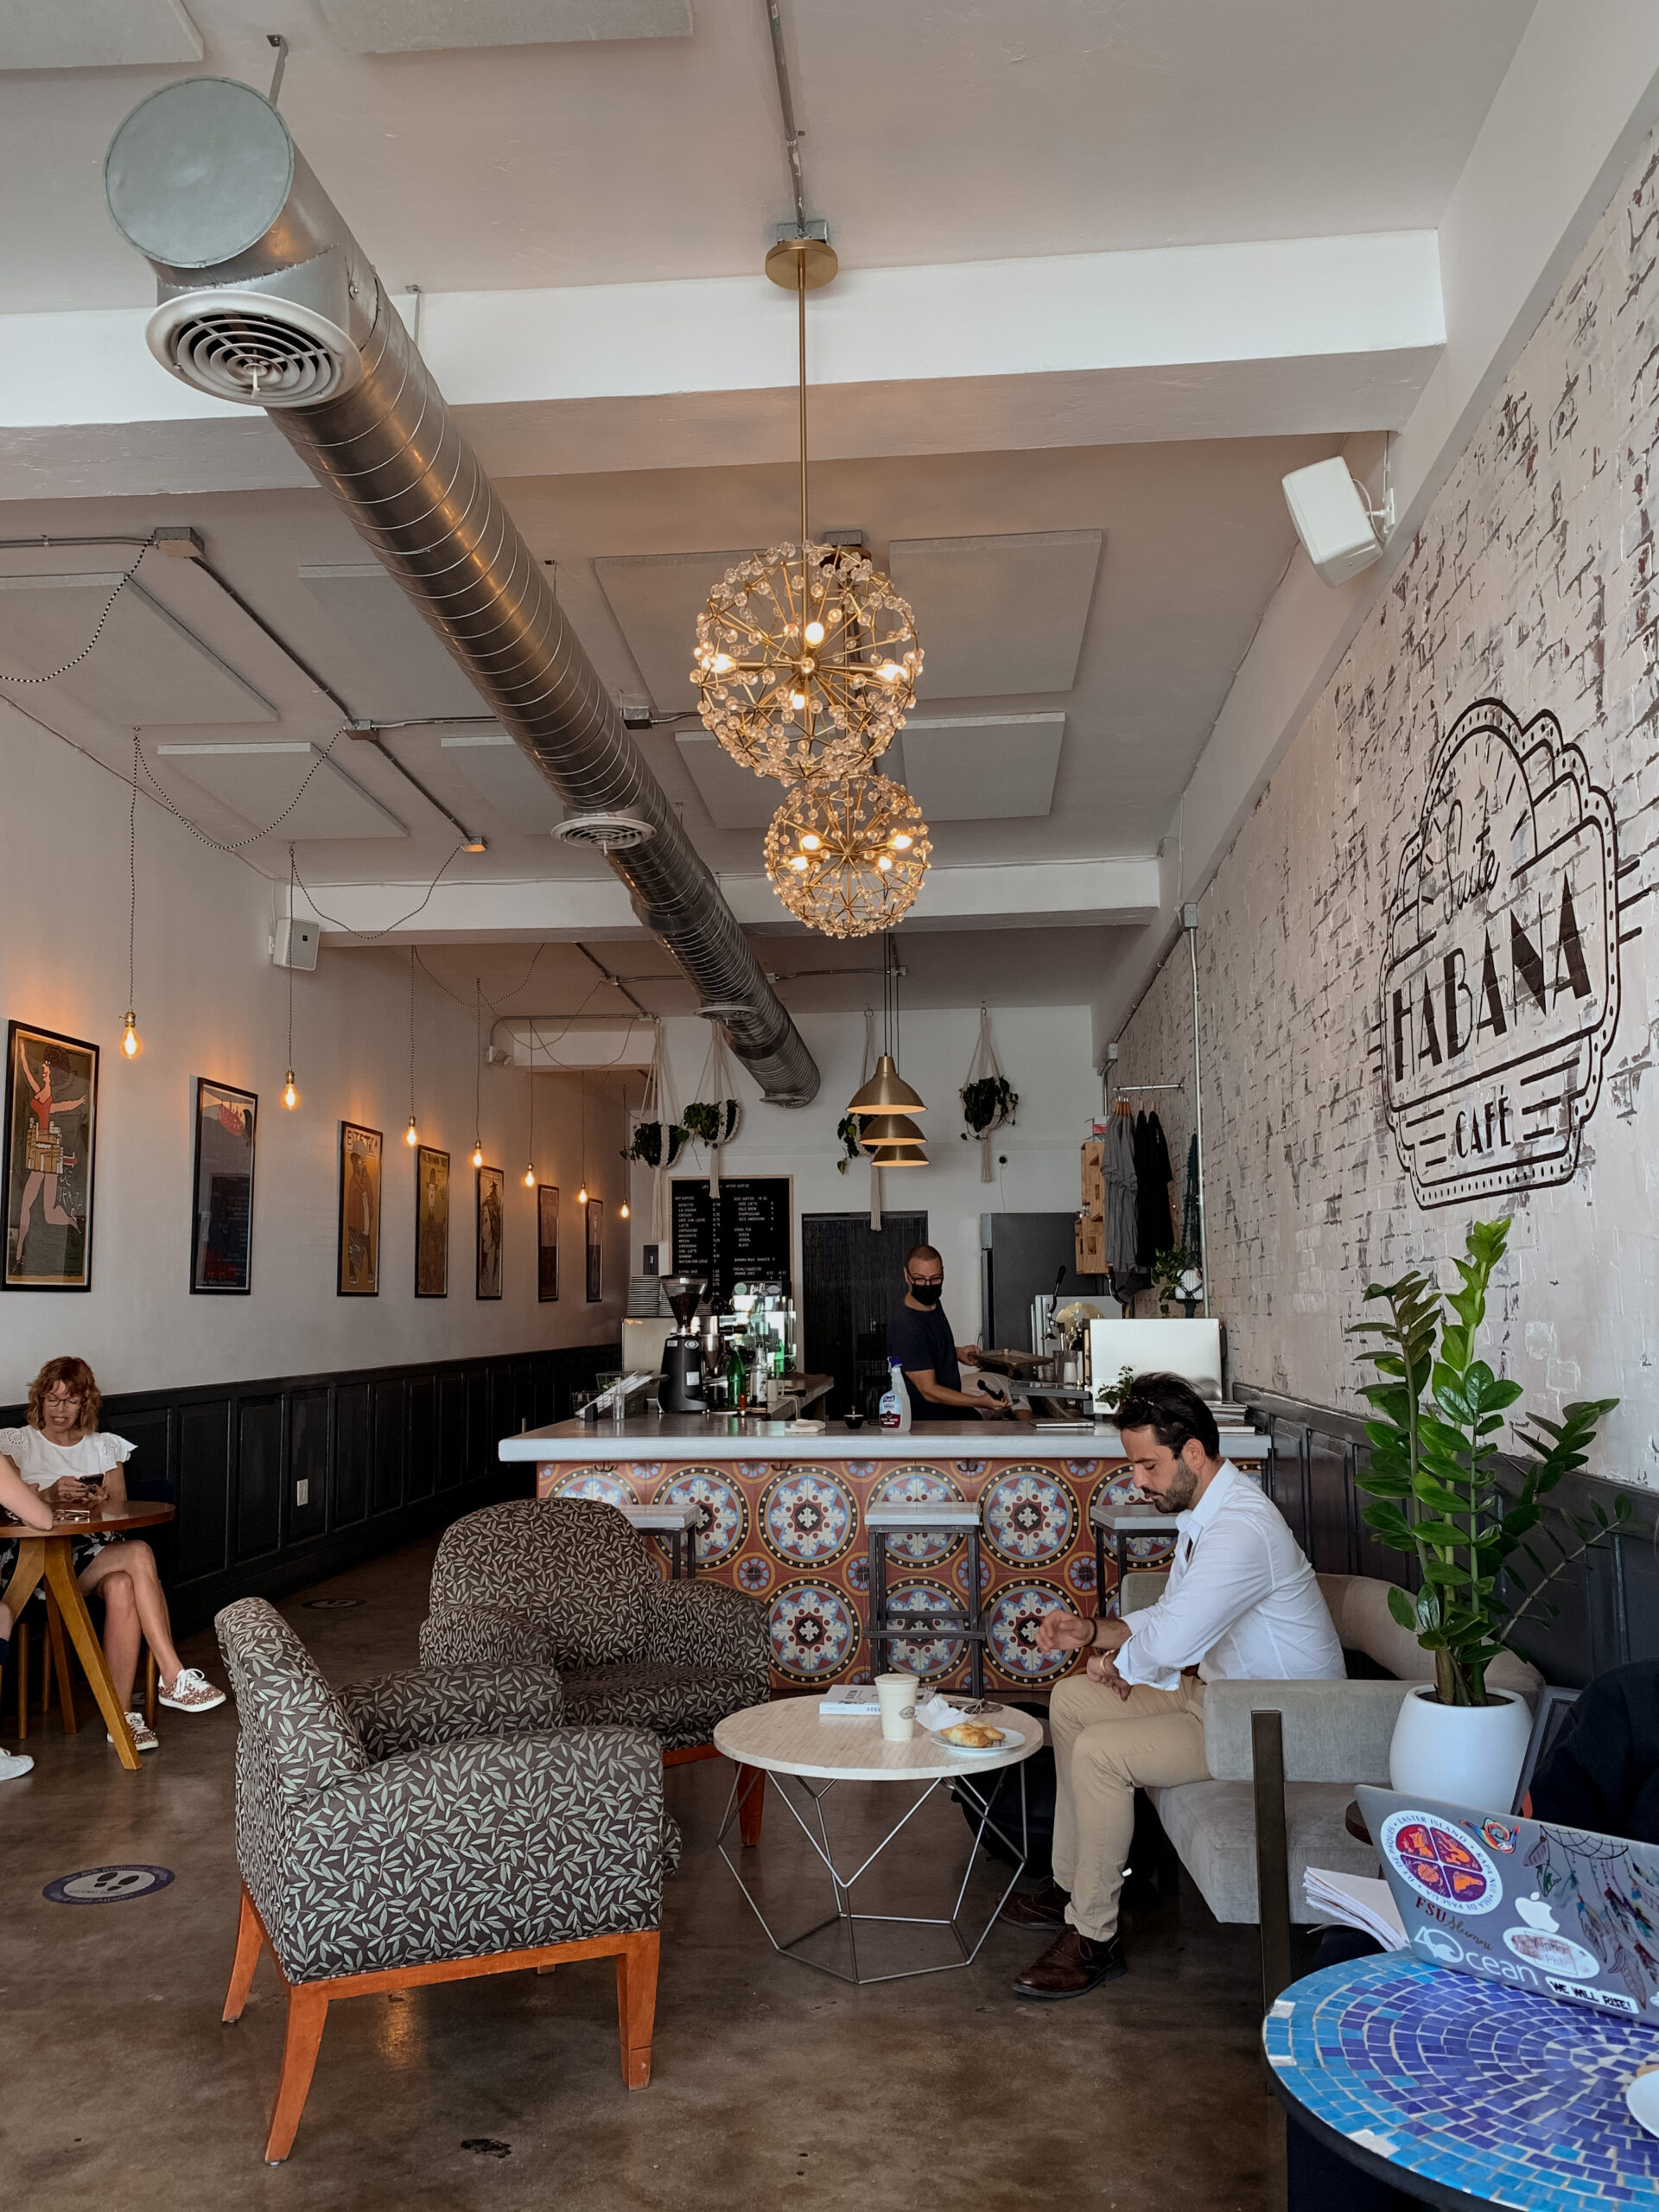 The Best Coffee Shops To Work From In Miami | aestheticstraveler.com luxury travel and design blog